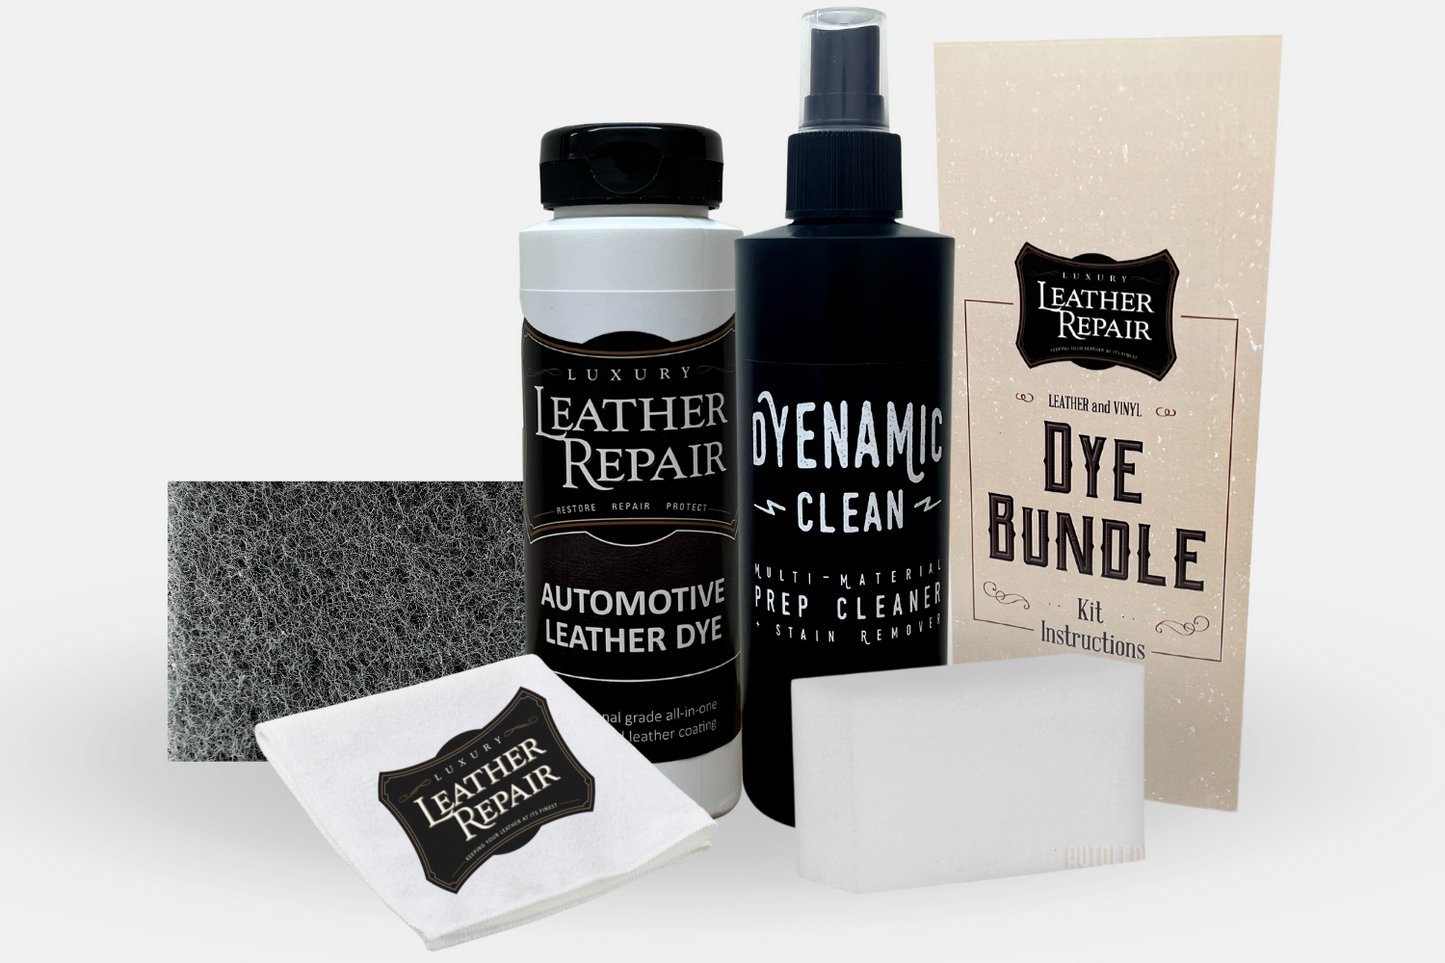 All in One Leather Dye and Sealant - Leather Dye Kit